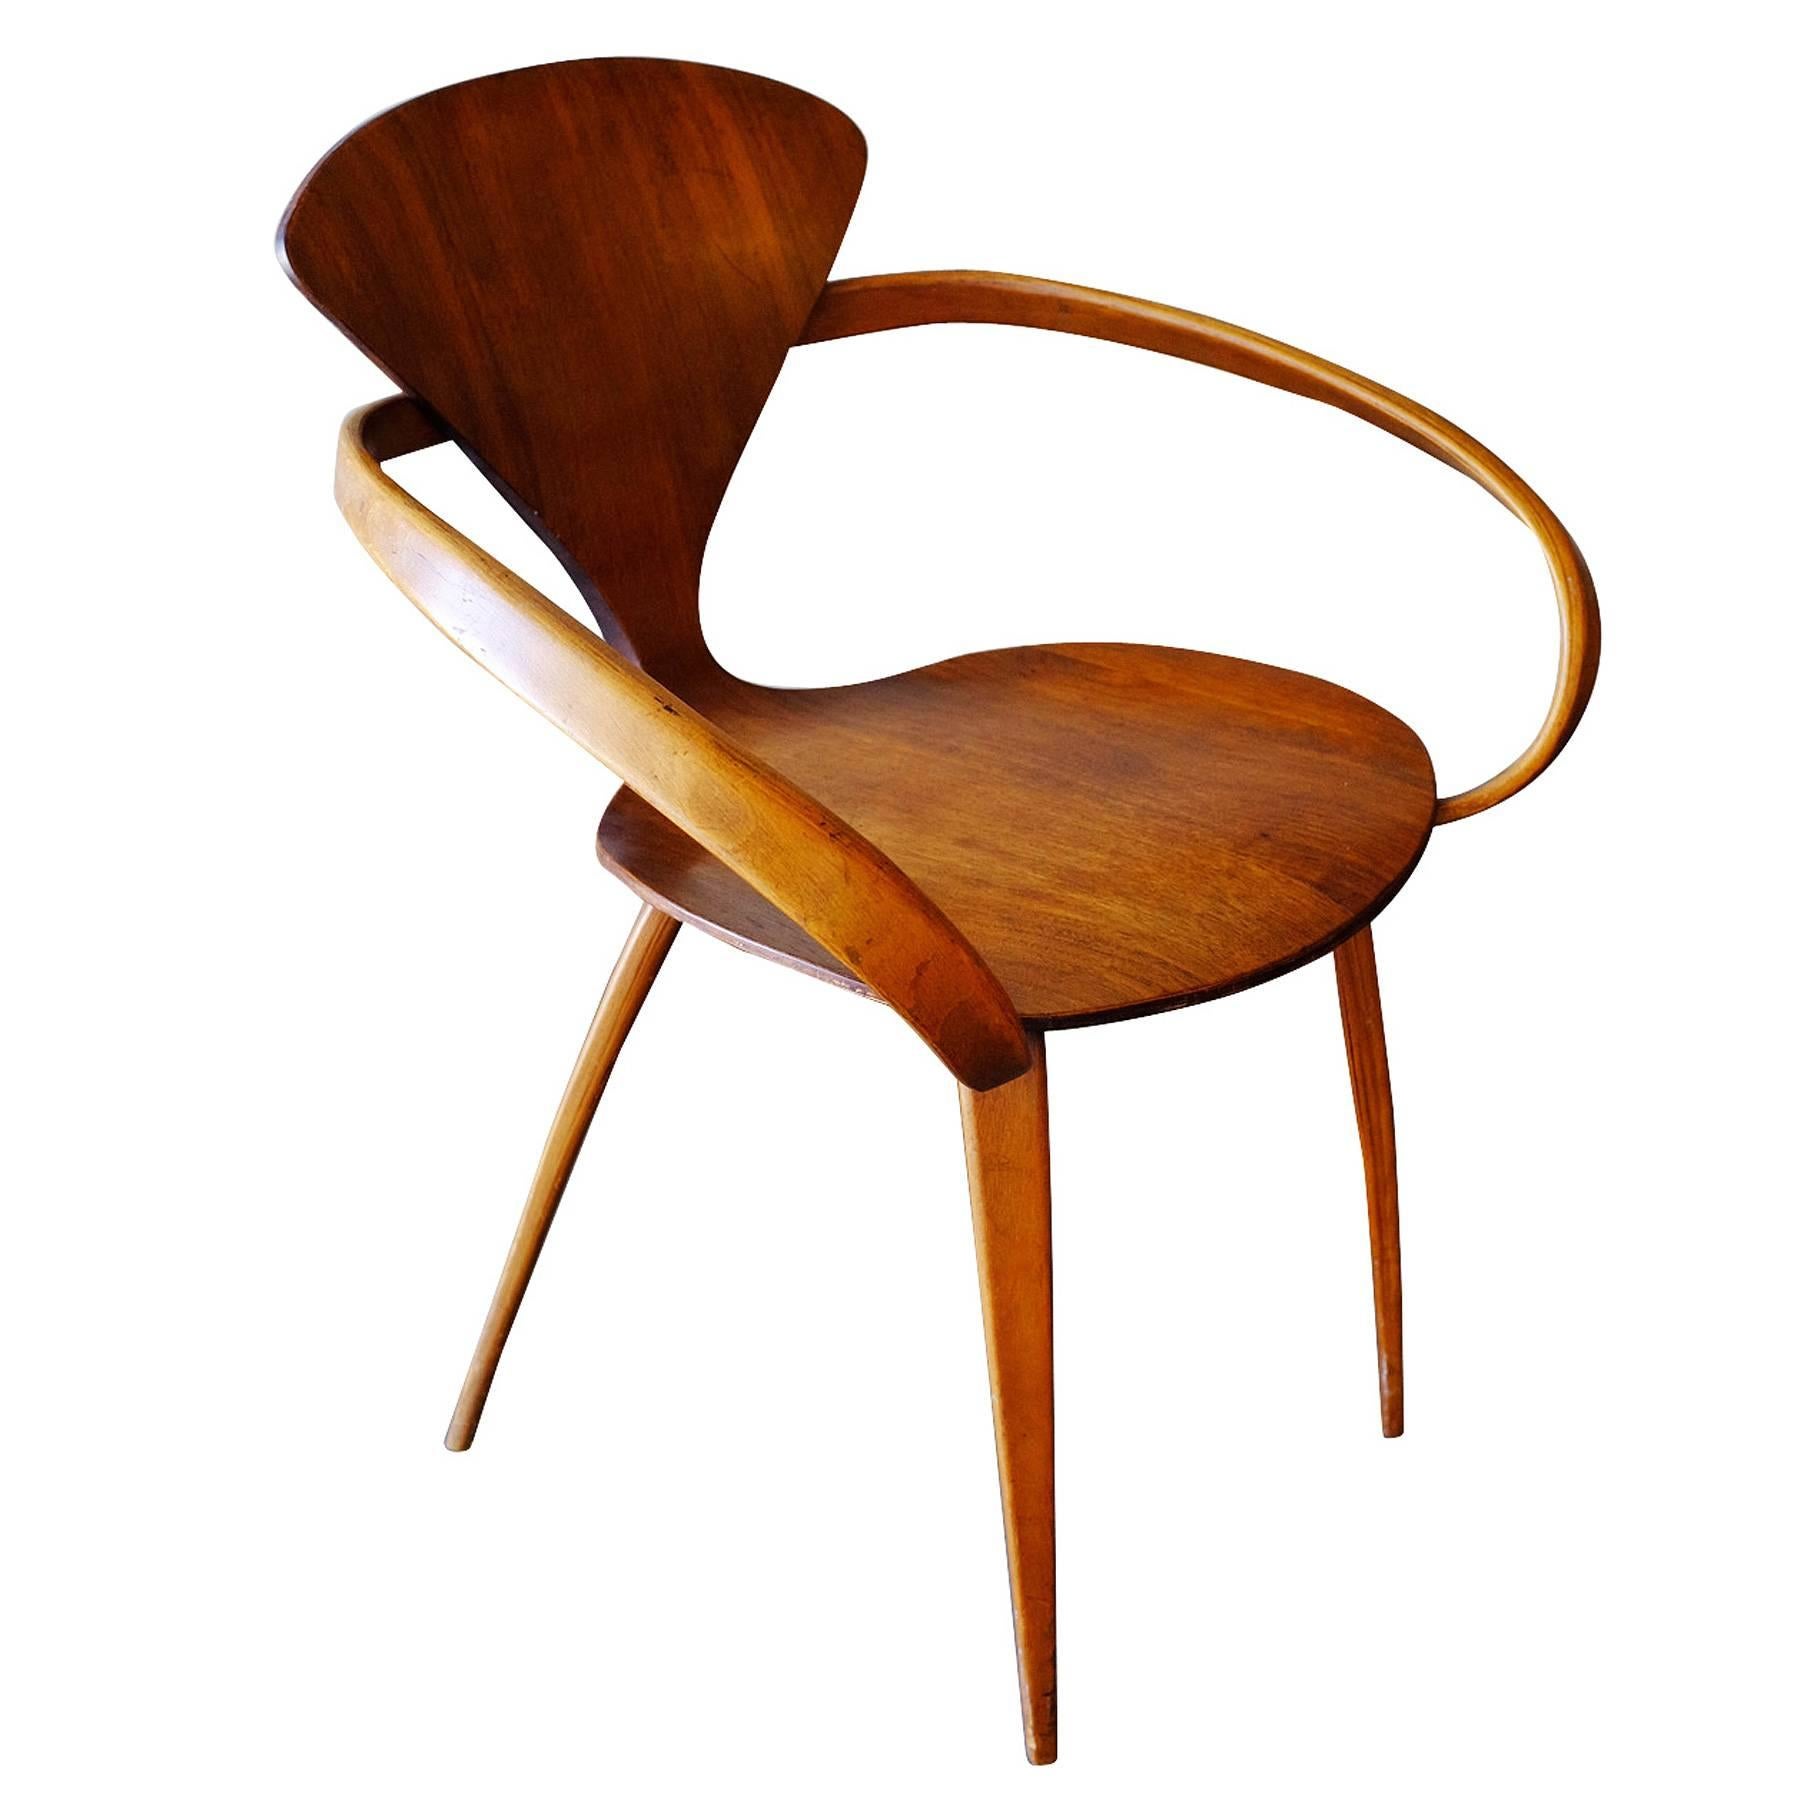 Plycraft sculptural walnut dining armchair designed by Norman Cherner made from steam form bent walnut plywood,

circa 1950.